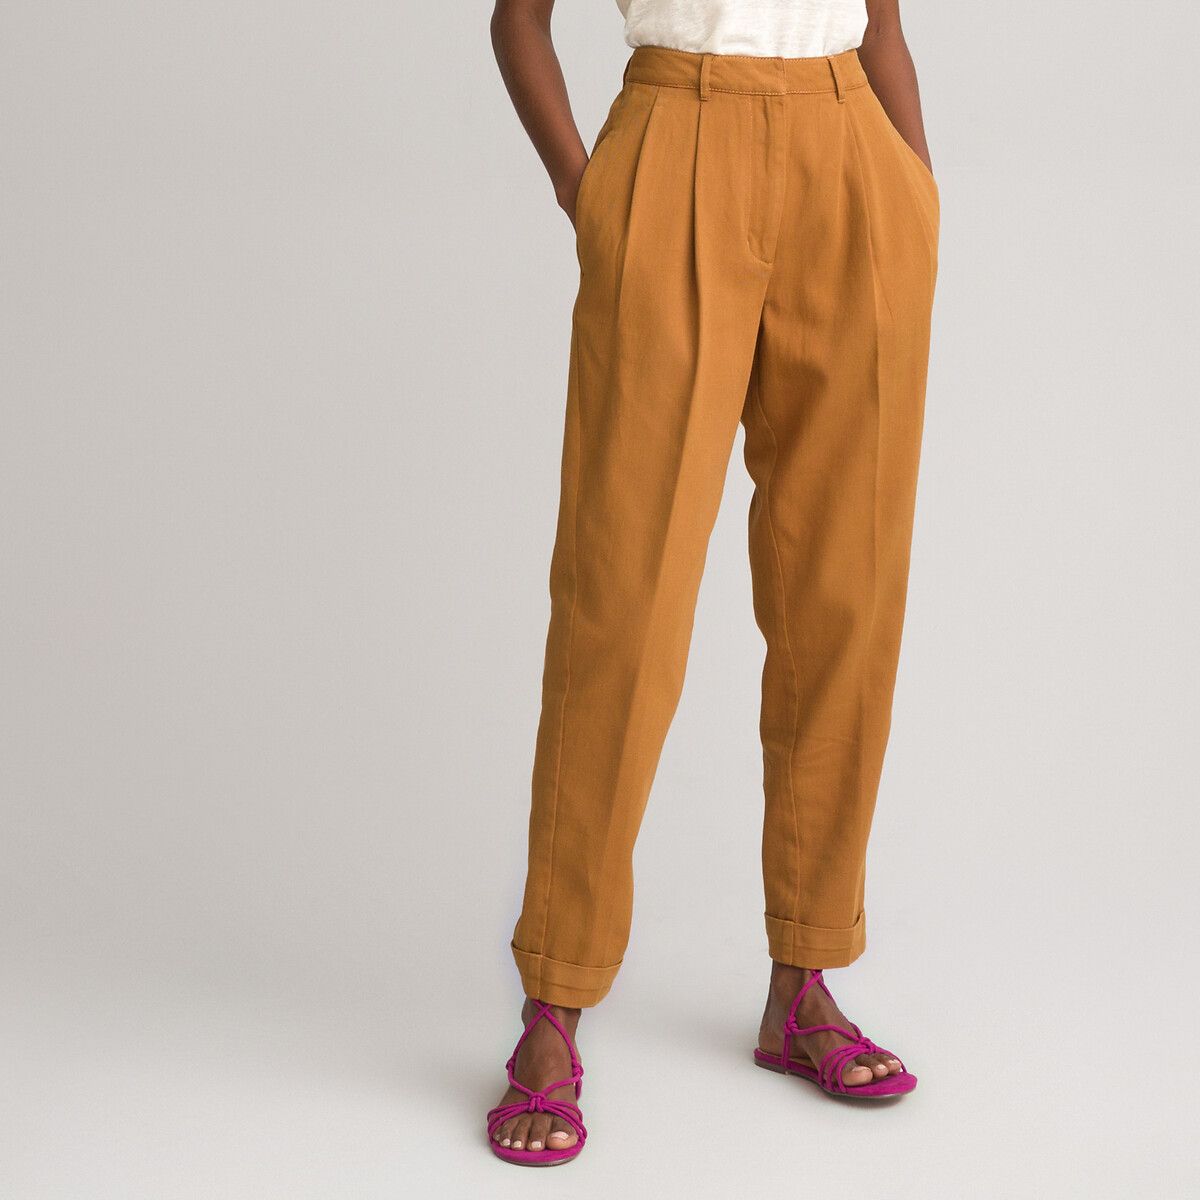 Pleat Front Carrot Trousers in Cotton Mix, Length 26" | La Redoute (UK)